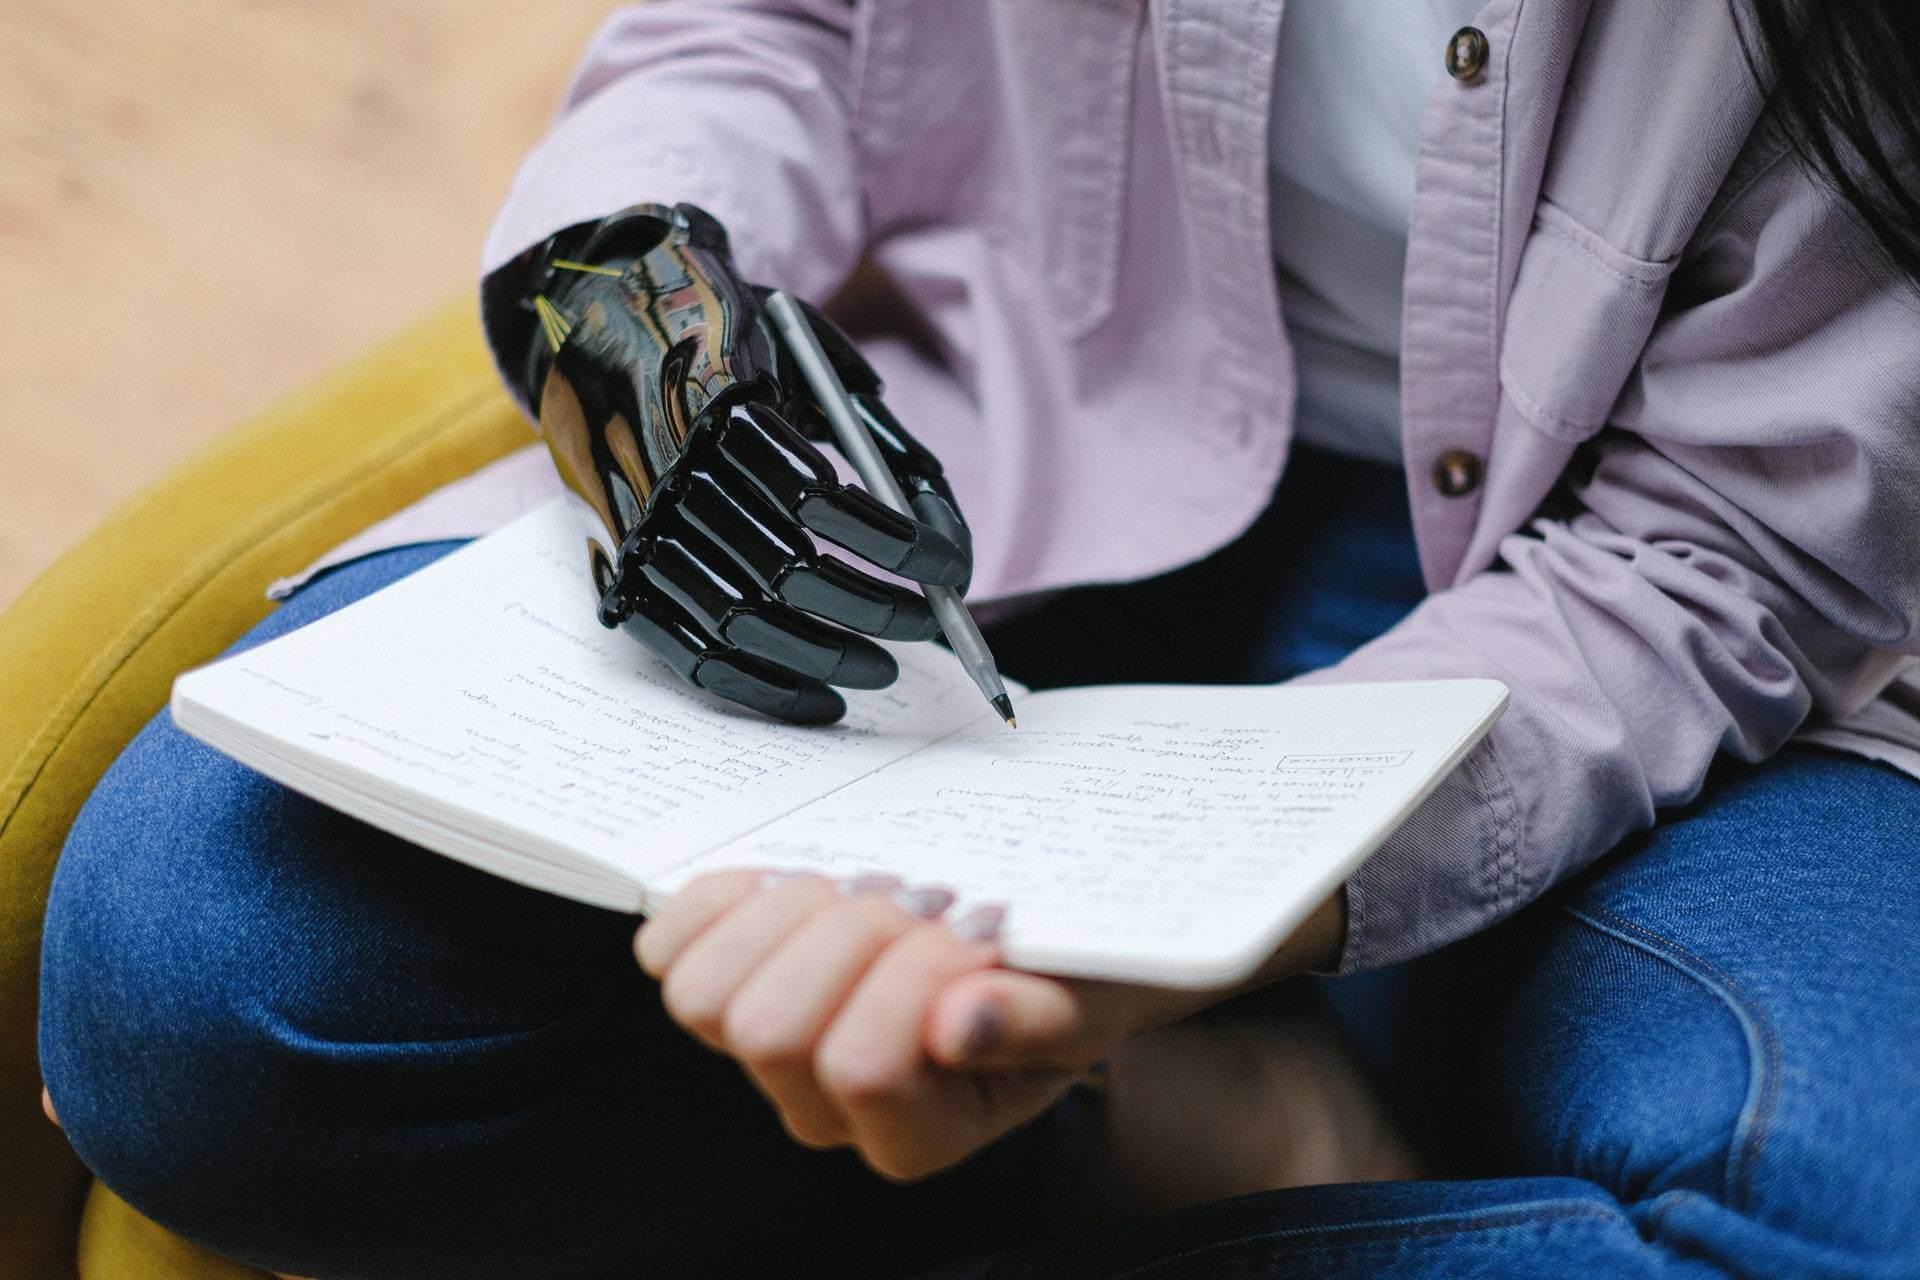 Amputee with prosthetic hand writing